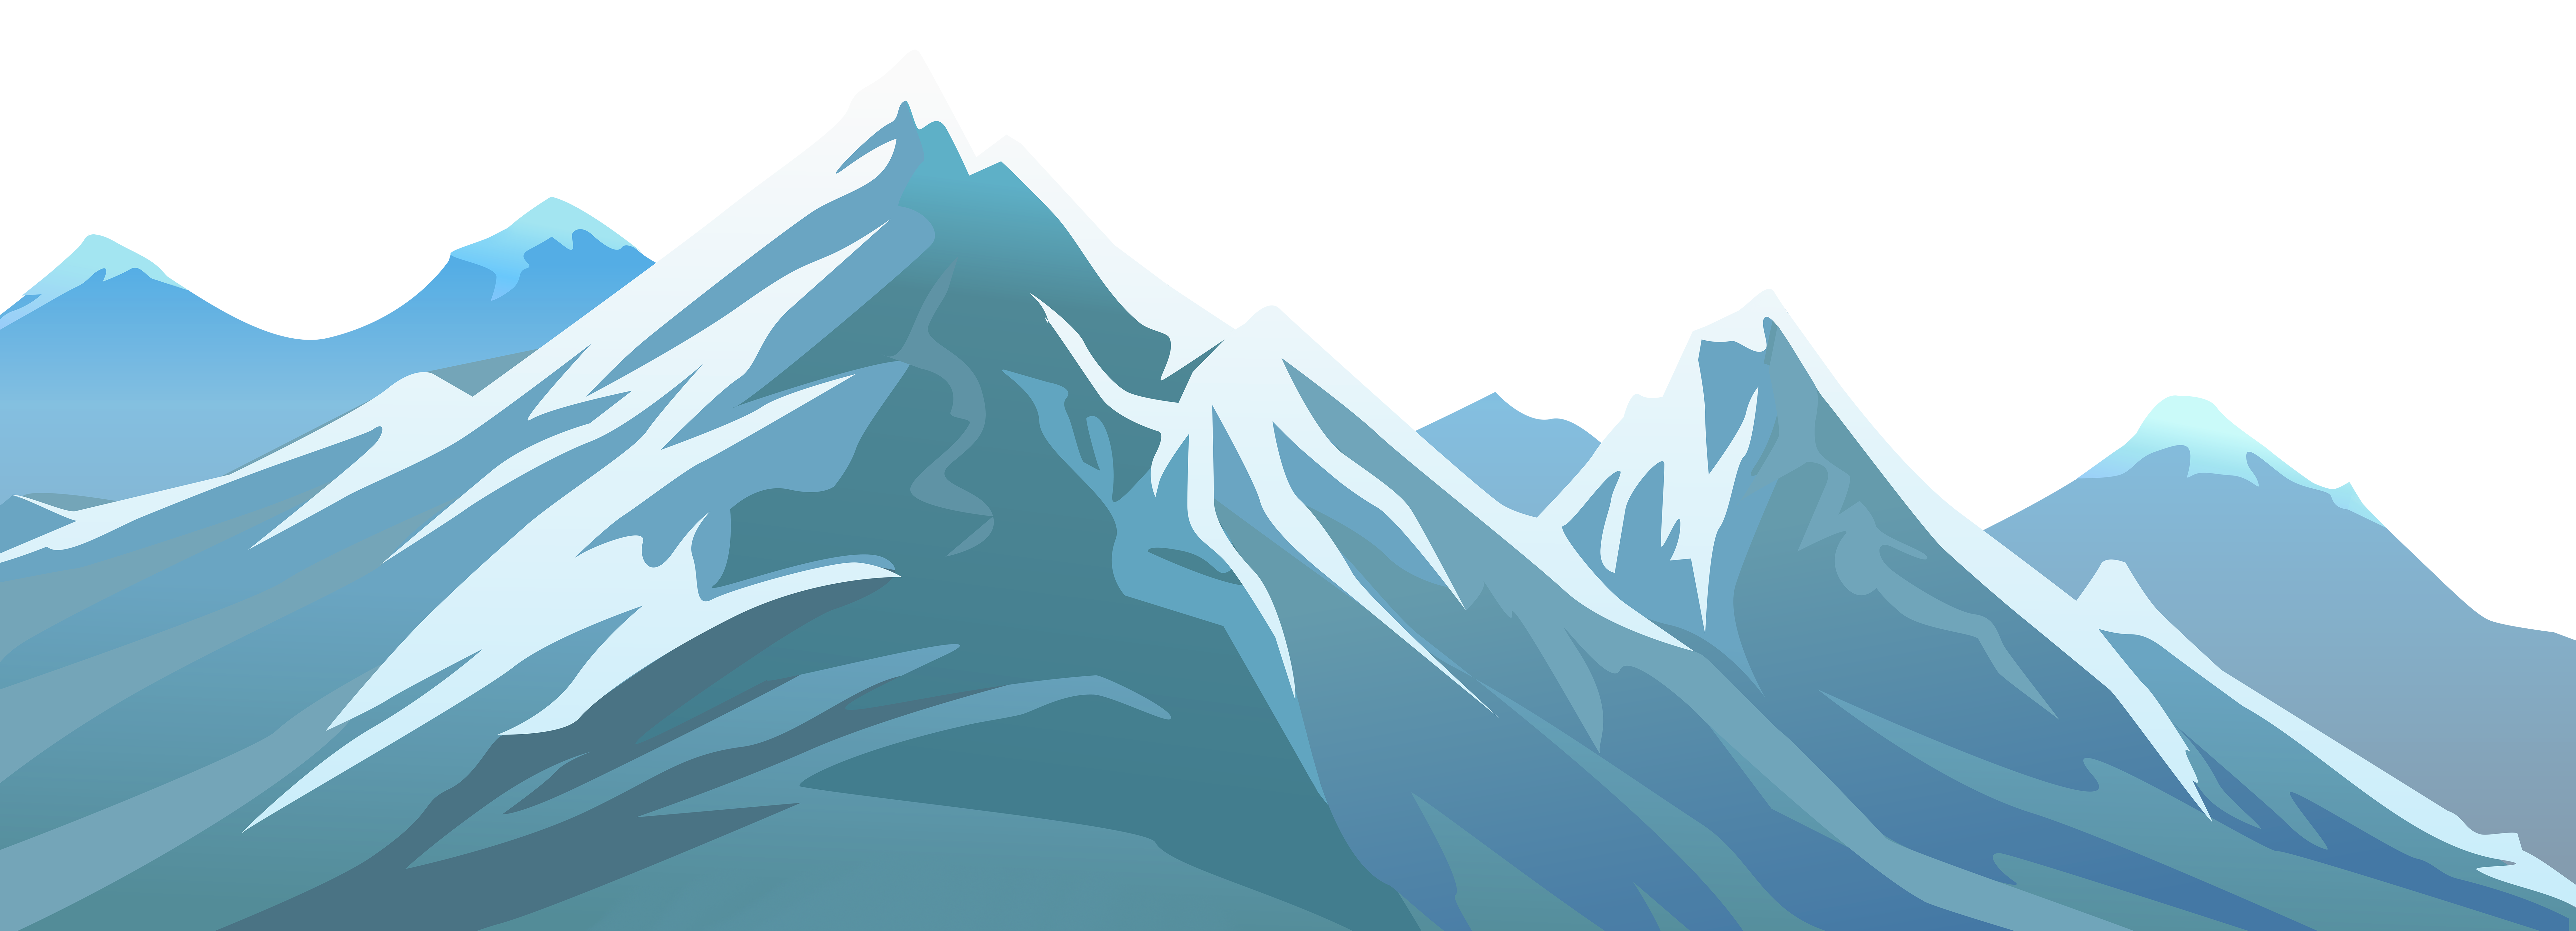 Snow mountains clipart - Clipground